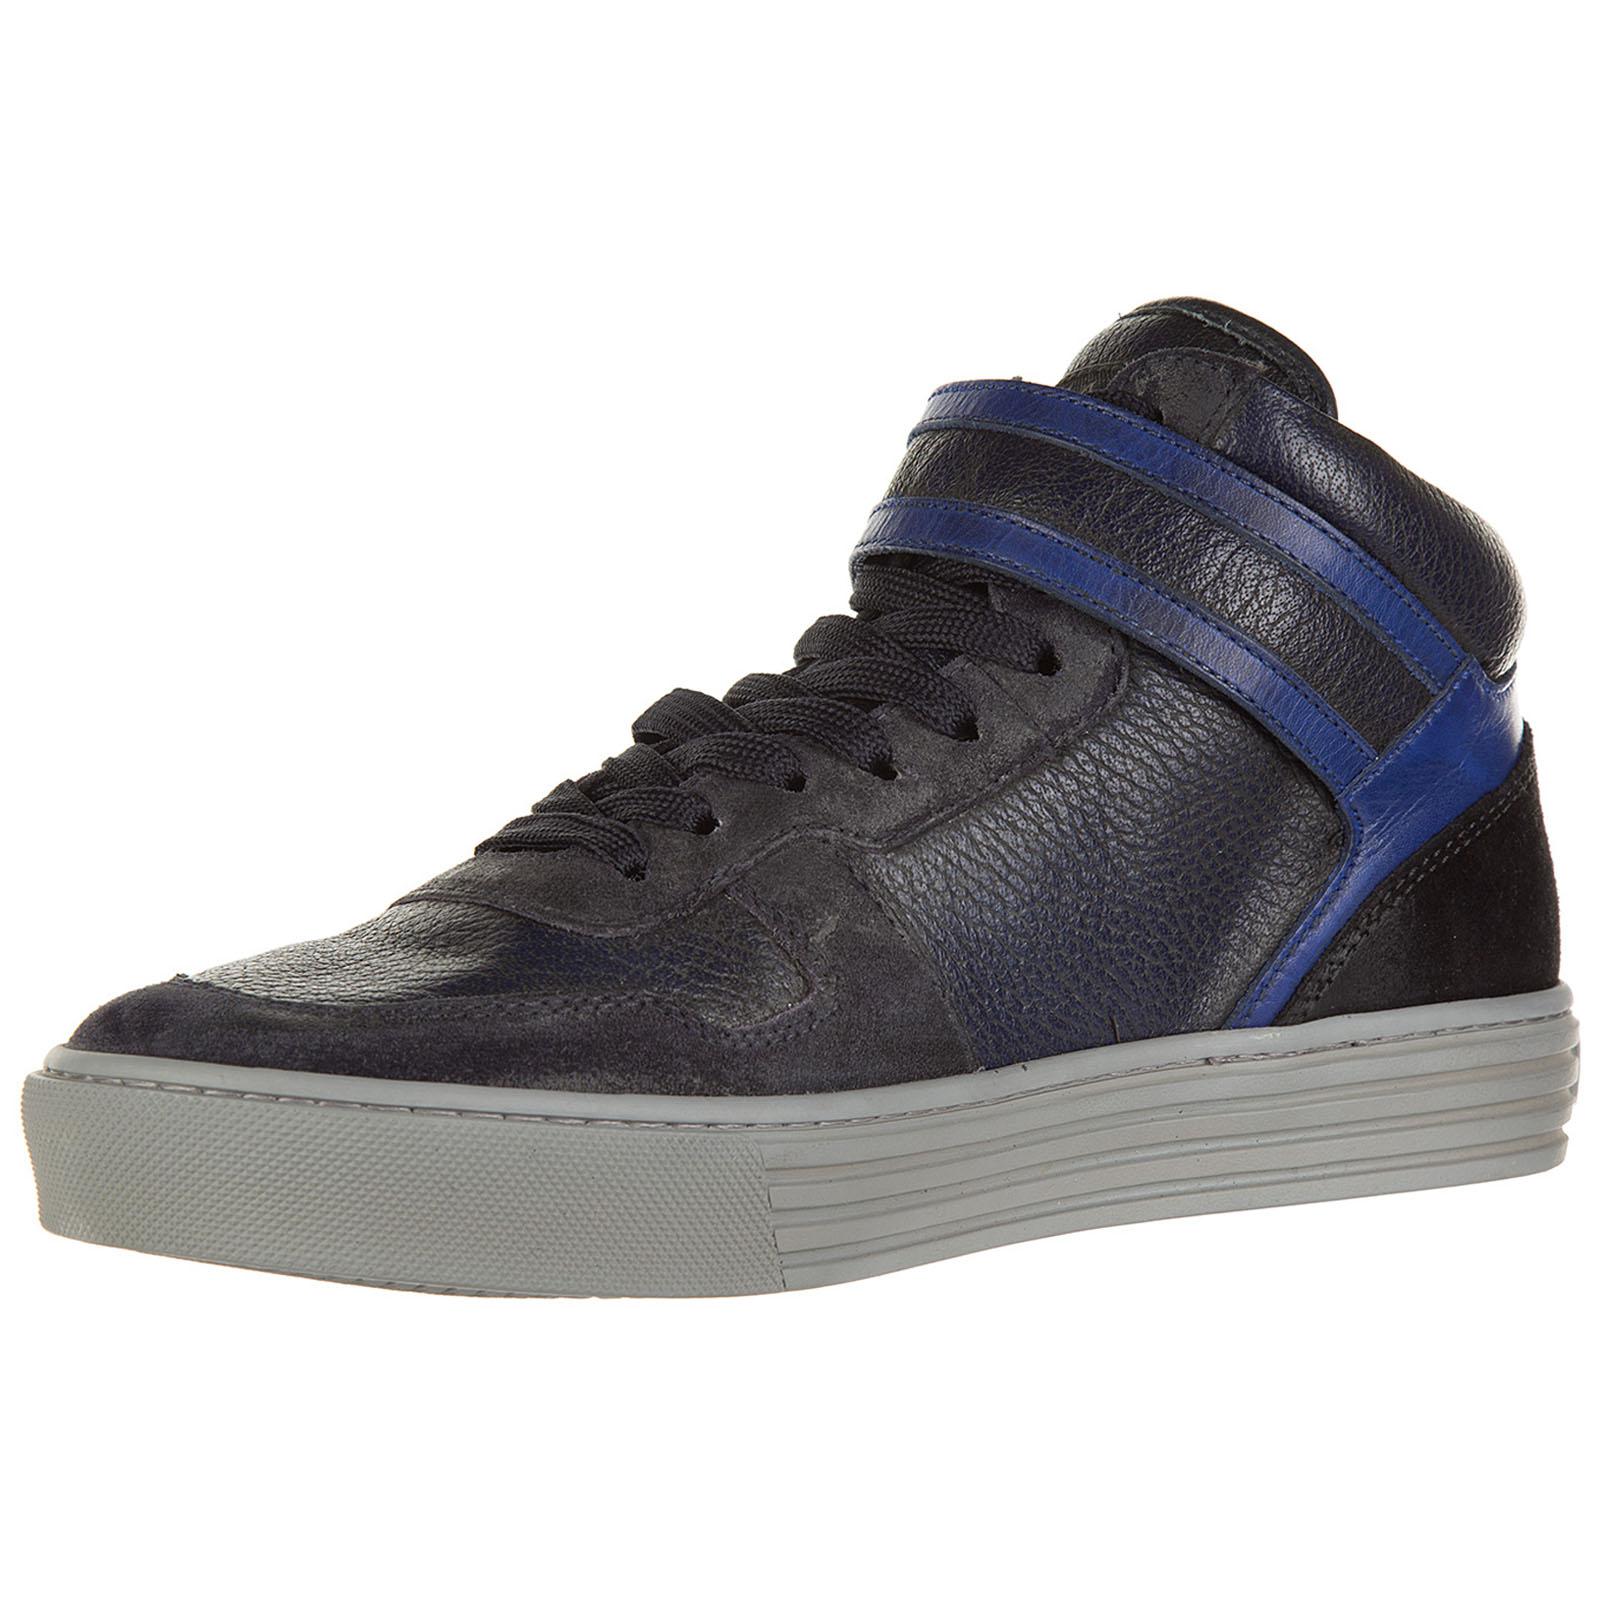 Hogan Rebel Shoes High Top Leather Trainers Sneakers R206 for Men - Lyst